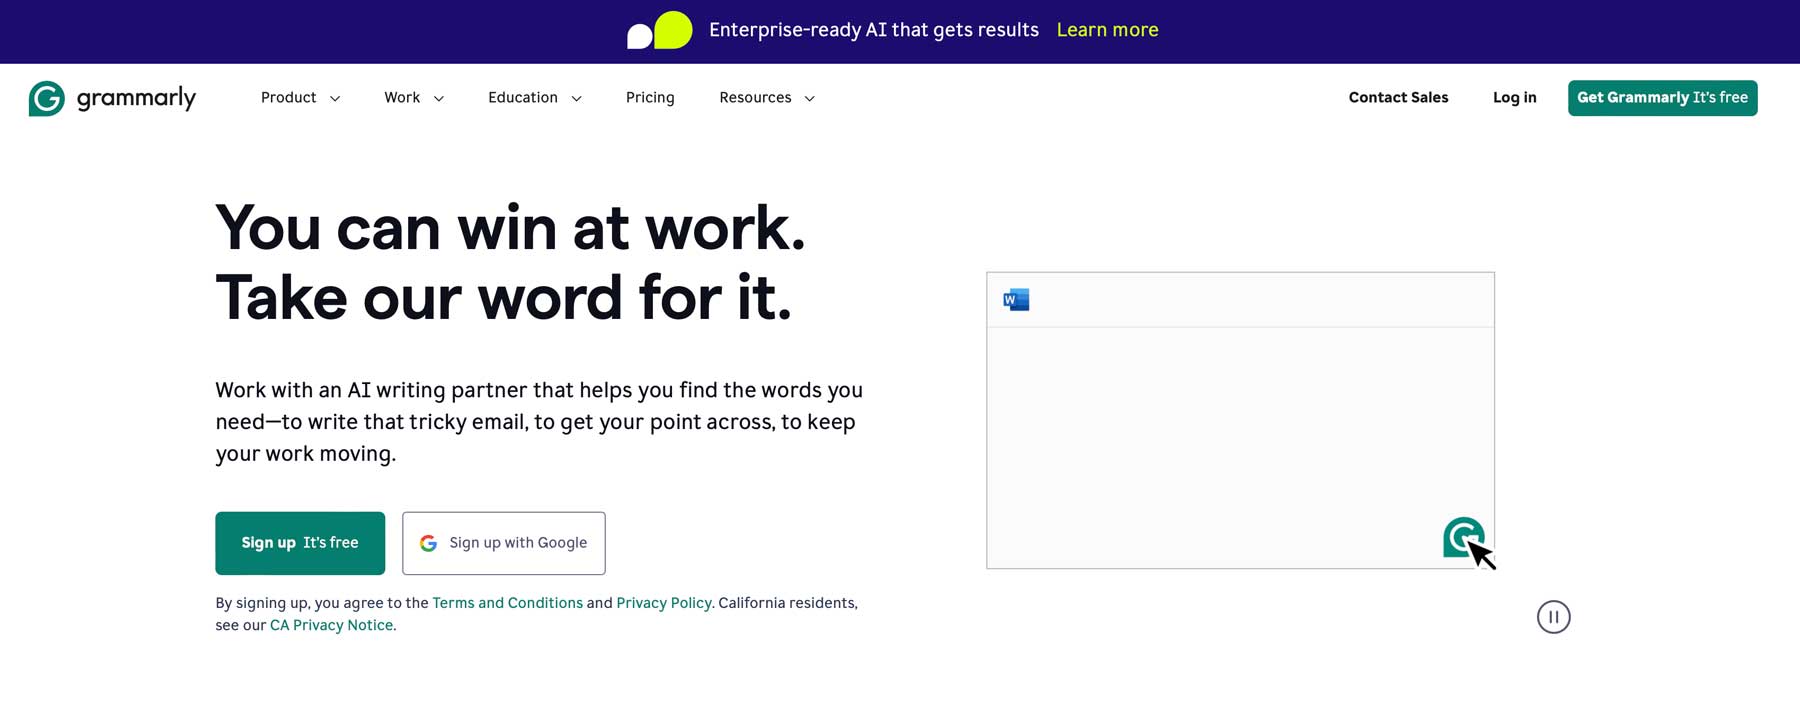 Grammarly best AI tools for career